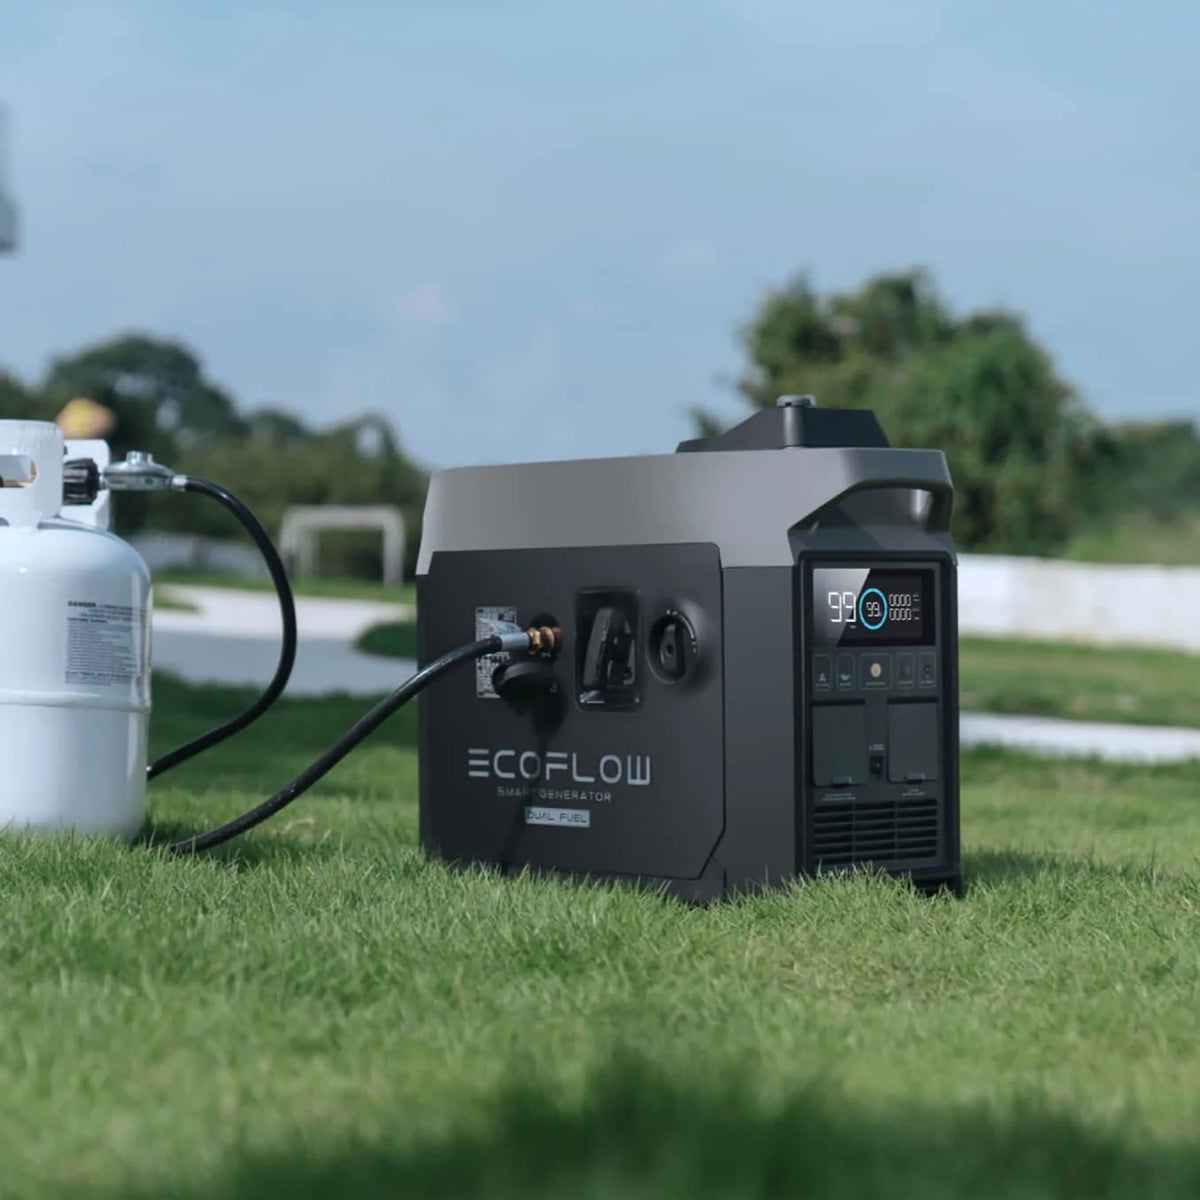 EcoFlow DELTA MAX 2,016Wh / Portable Power Station, SAVE $500.00